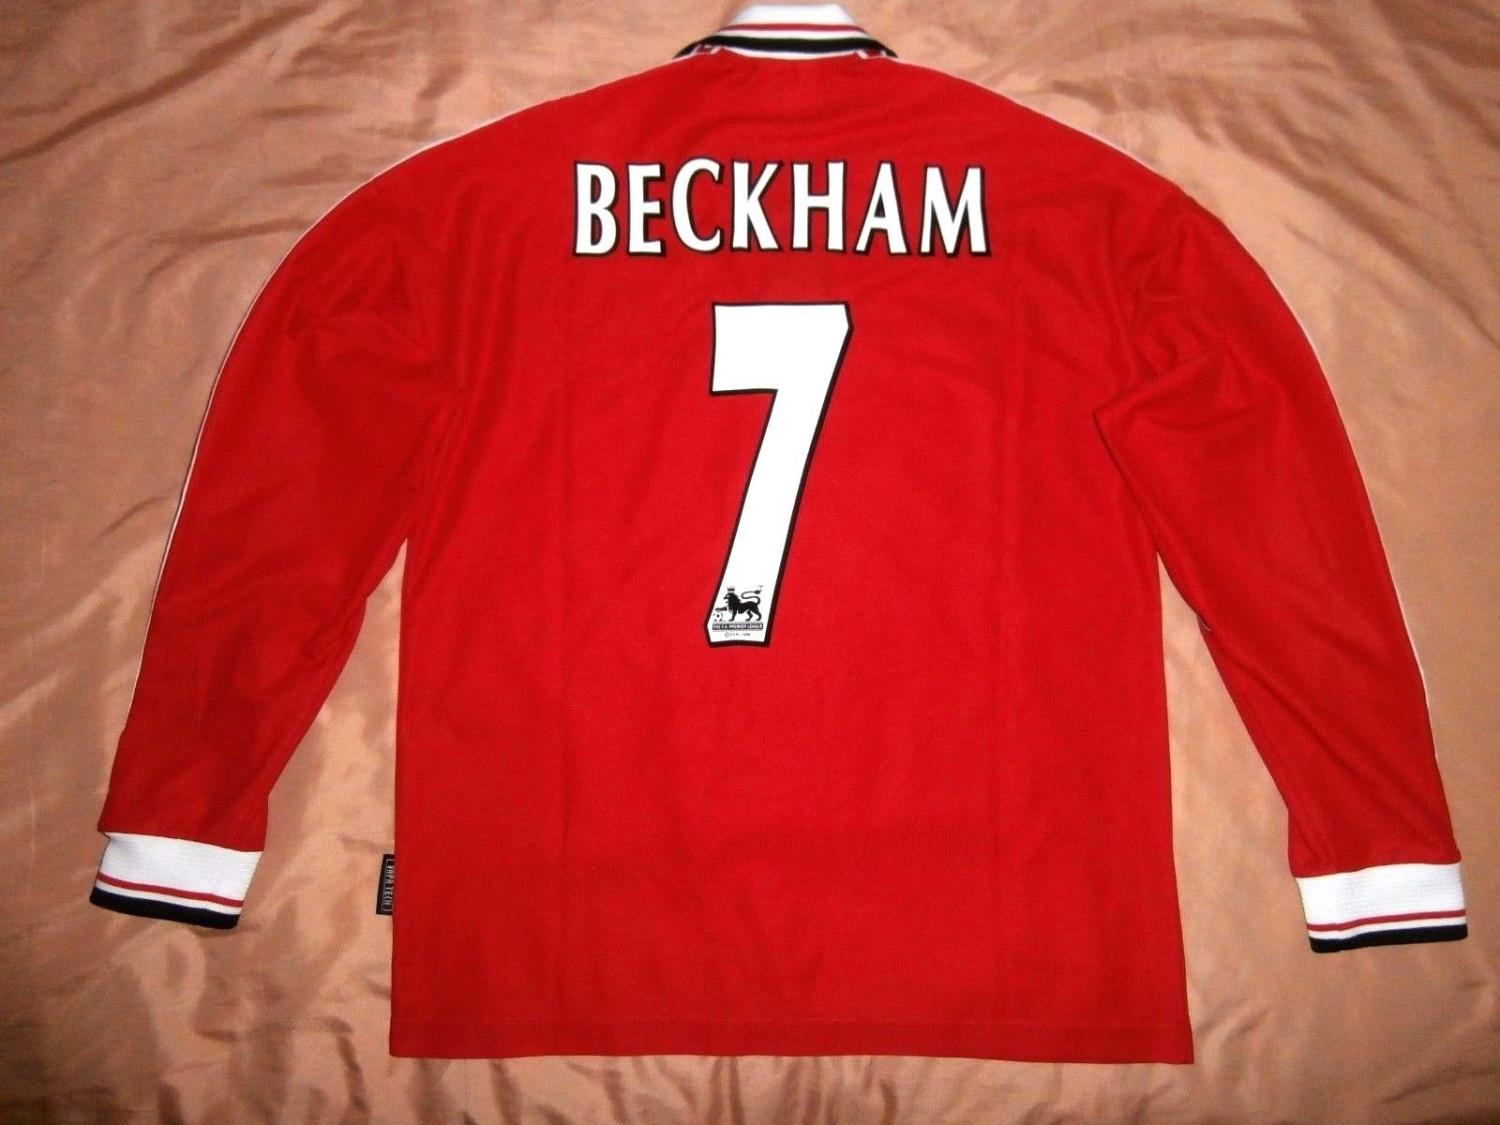 Manchester United Home football shirt 1998 - 2000. Sponsored by Sharp